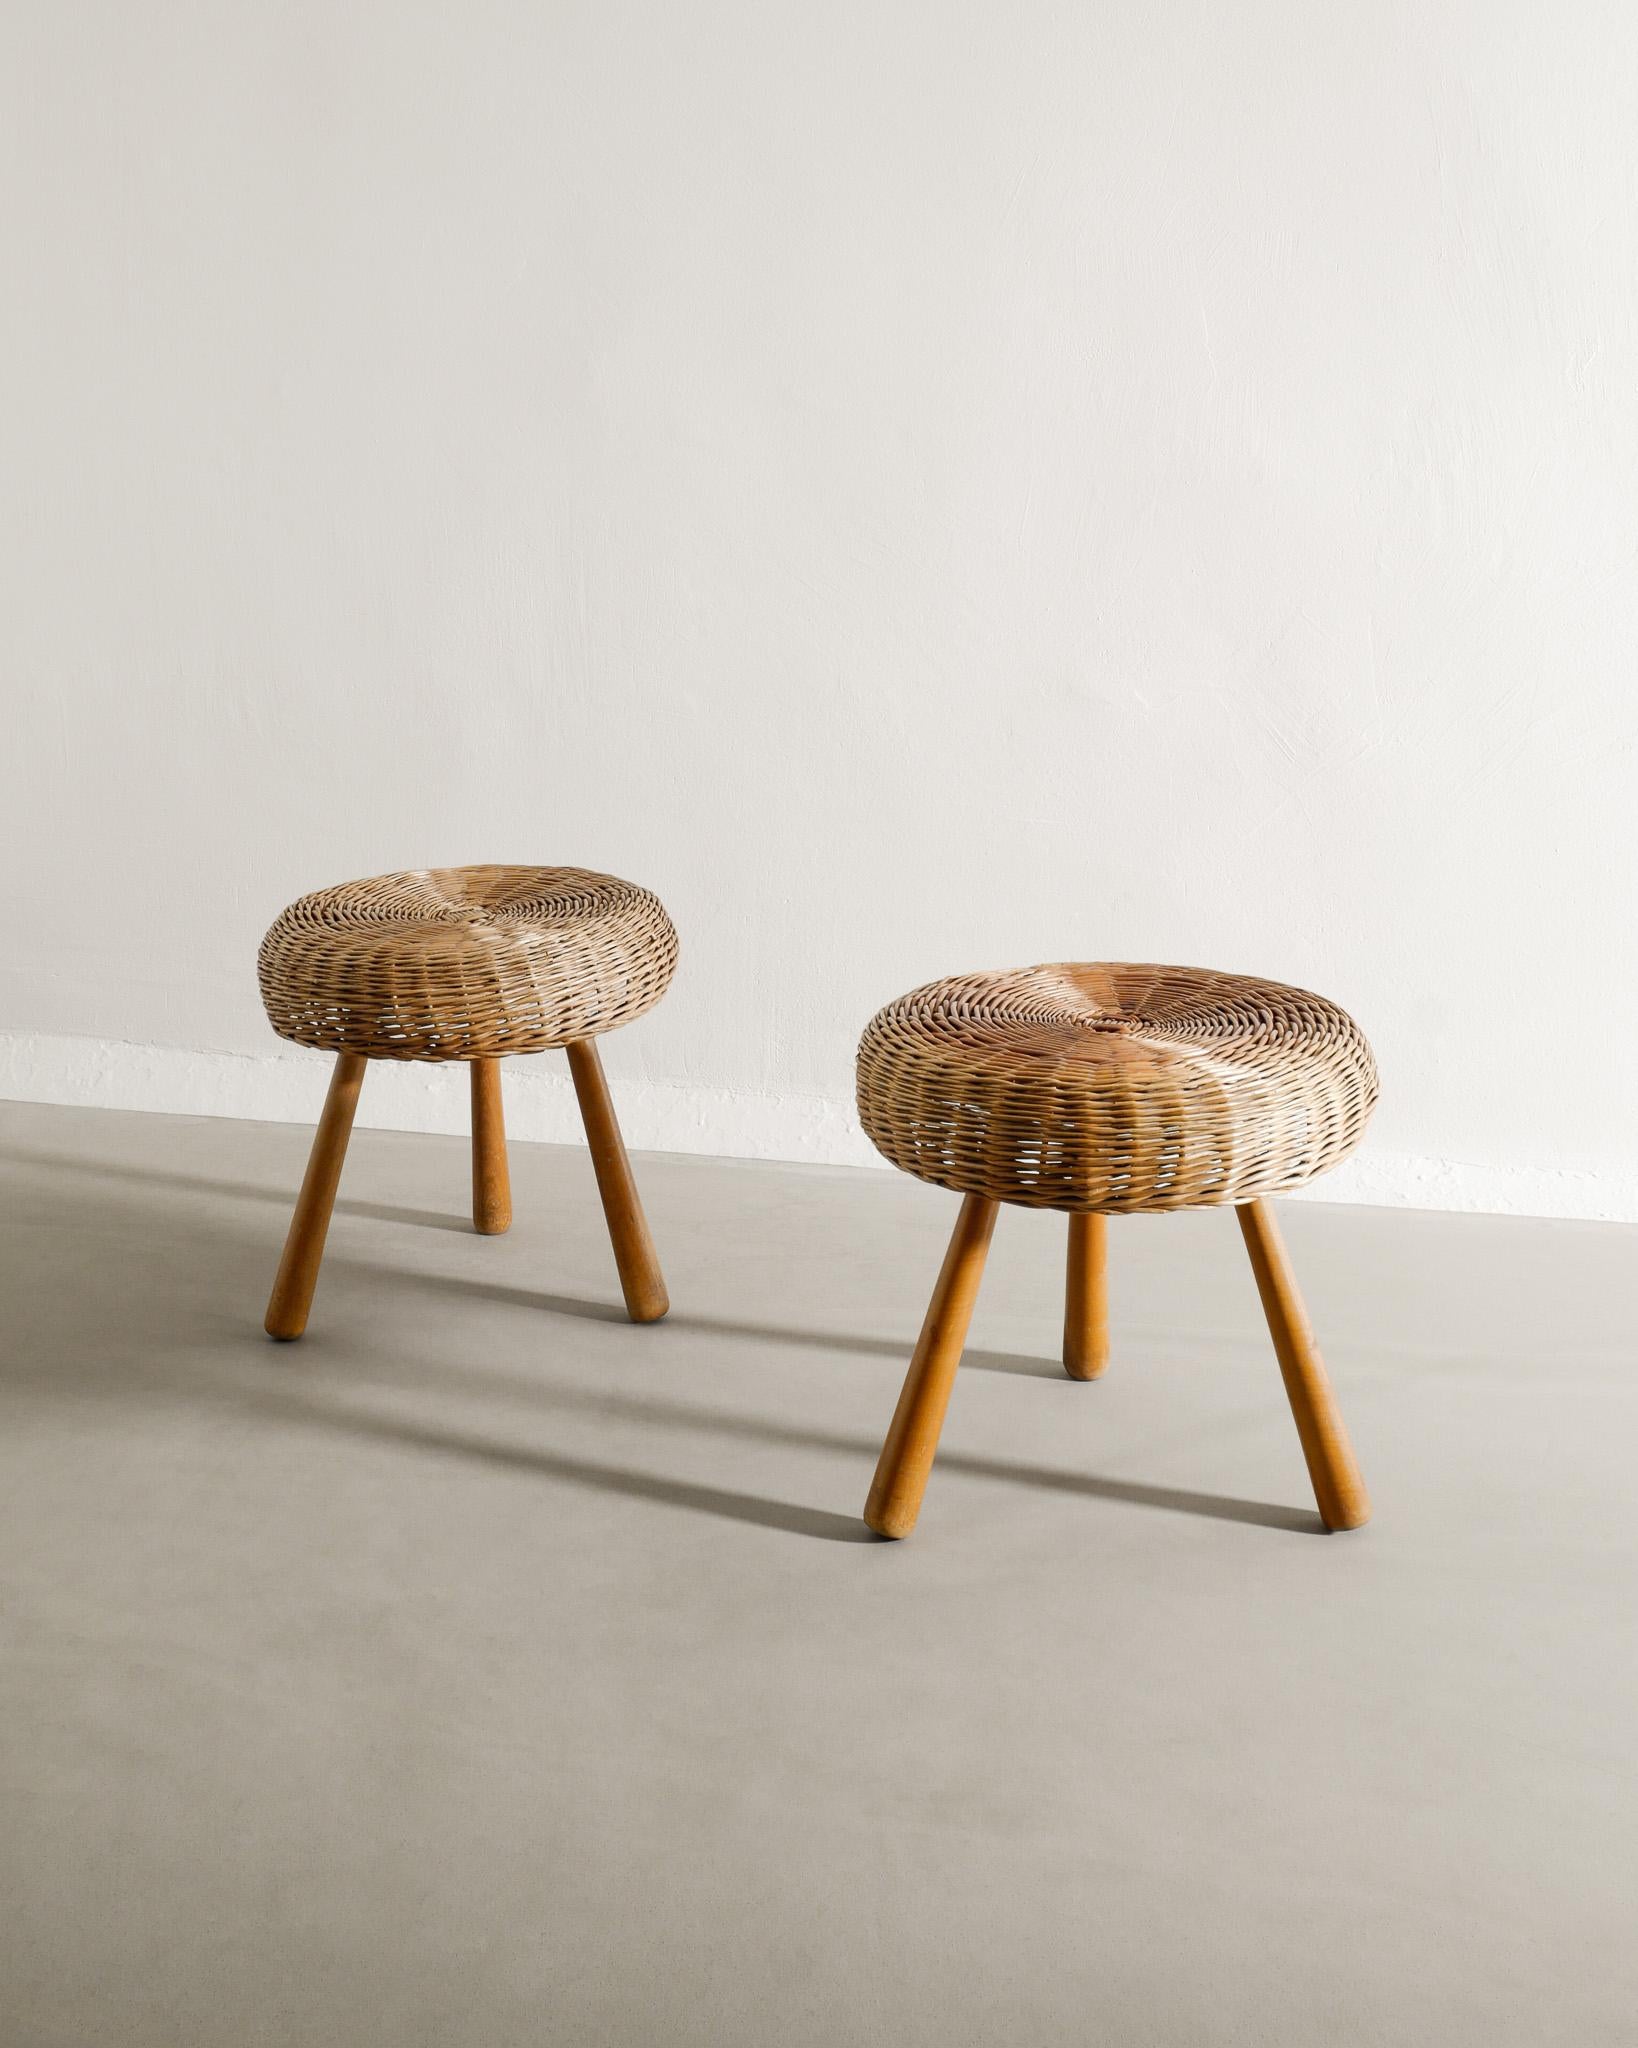 Rare pair of mid century tripod wooden and wicker / rattan low stools in style of Tony Paul most likely produced in Denmark, 1960s. In good original condition. Stable and the seats are without defects. 

Dimensions: H: 42 cm / 16.50